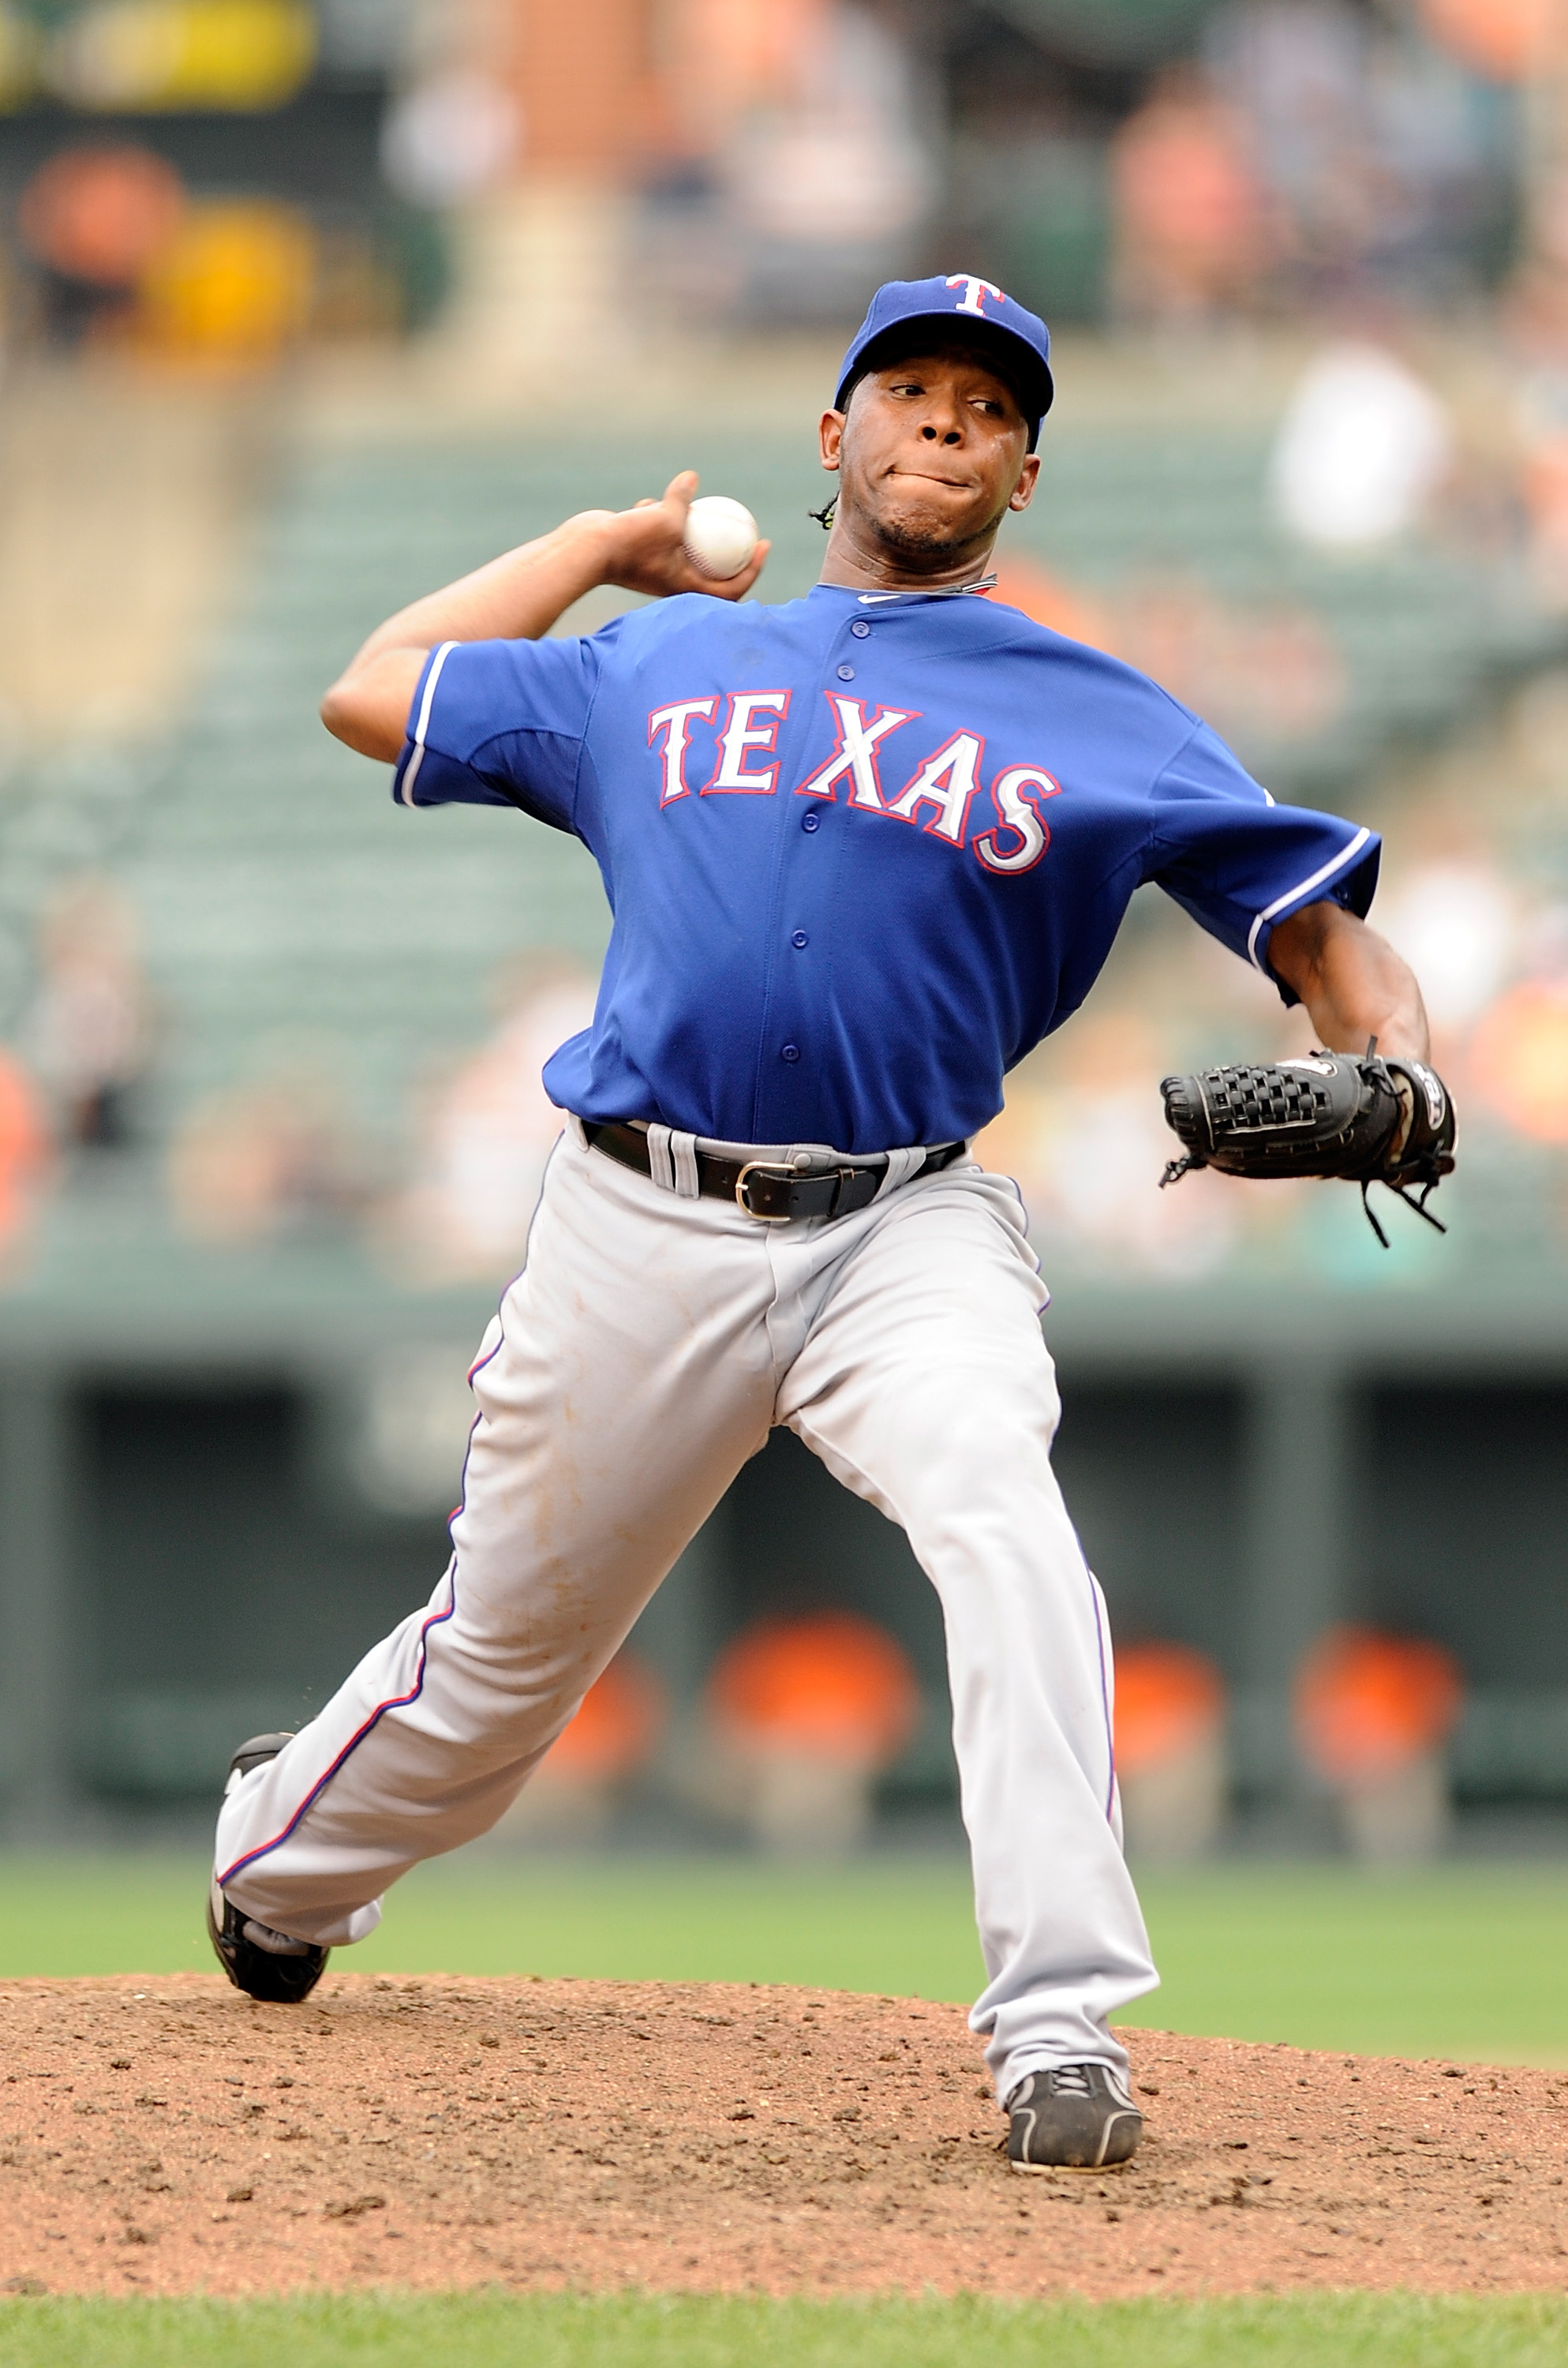 BALTIMORE - AUGUST 22:  Neftali Feliz #30 of the Texas Rangers pitches against the Baltimore Orioles at Camden Yards on August 22, 2010 in Baltimore, Maryland. The Rangers beat the Orioles 6-4.  (Photo by Greg Fiume/Getty Images)